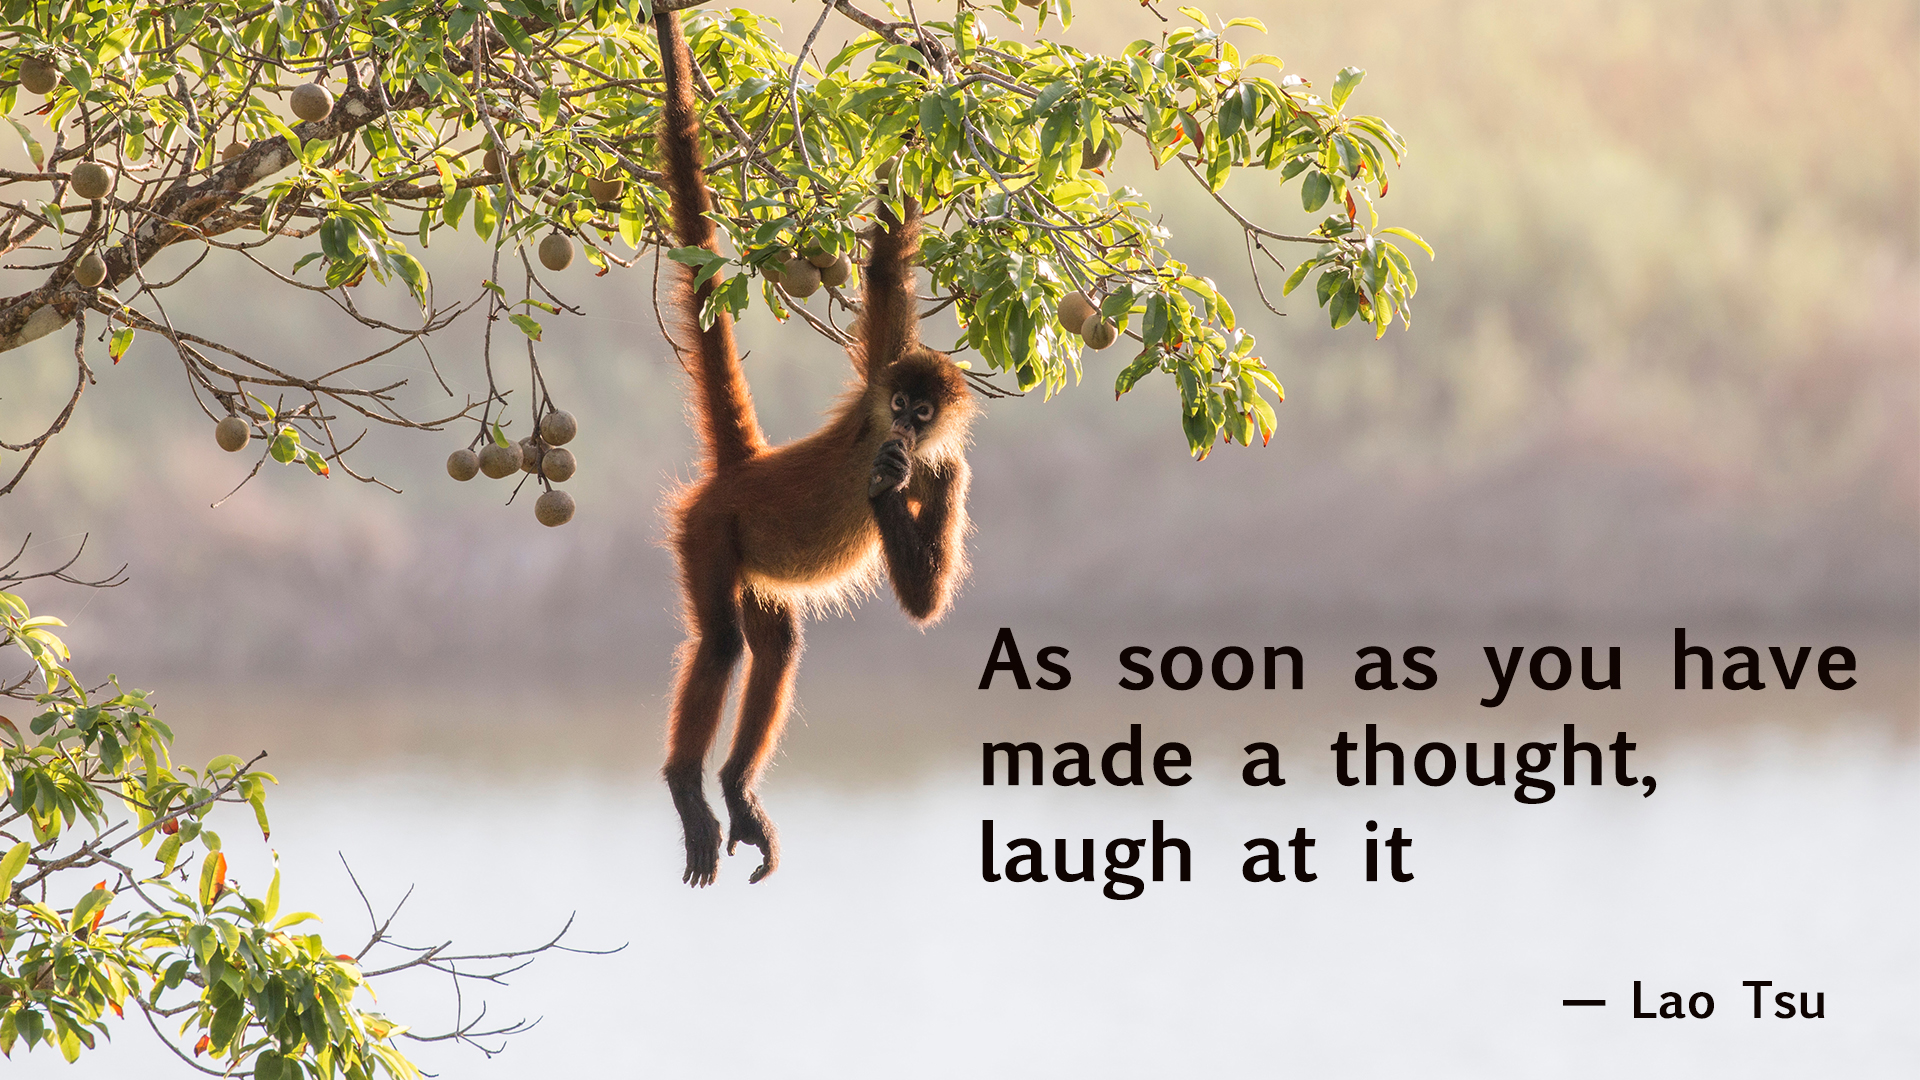 Lao Tsu quote about Laughter.